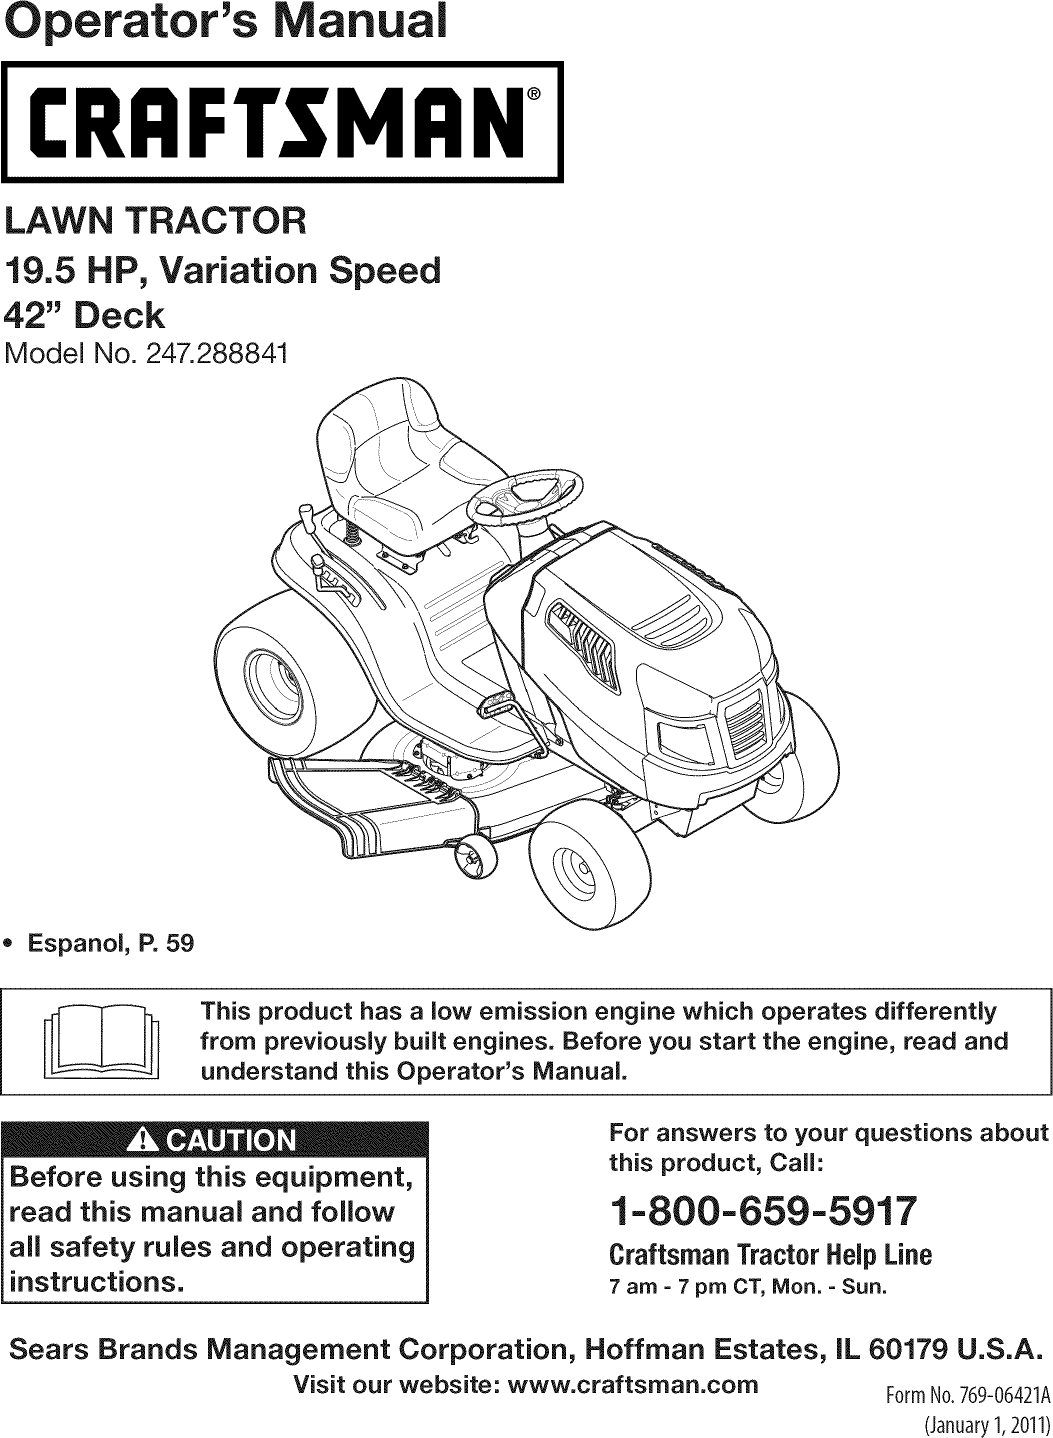 craftsman-247288841-user-manual-tractor-manuals-and-guides-1109233l